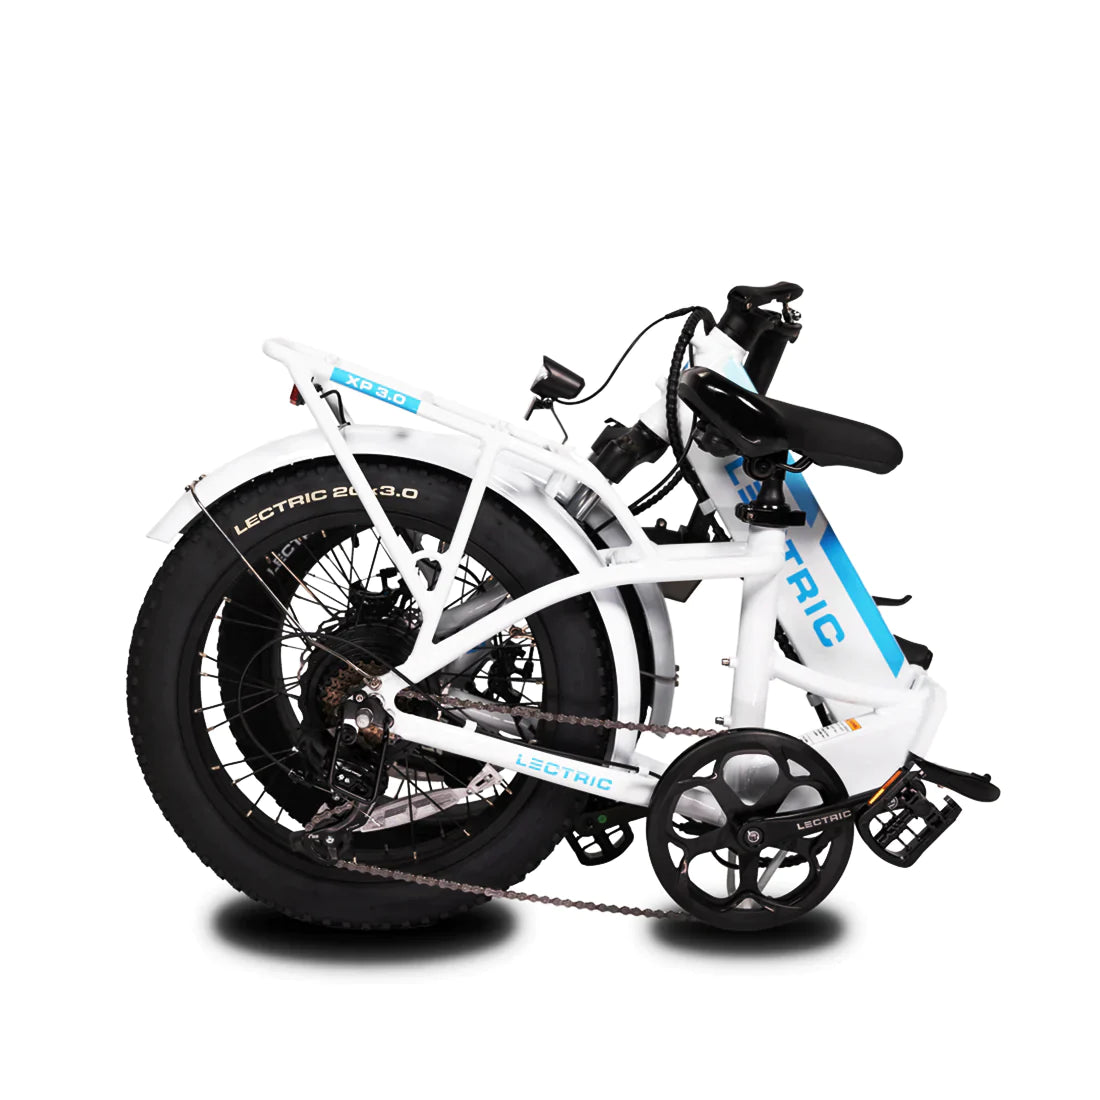 Lectric 3.0 Folding bike   *****In Store only*****